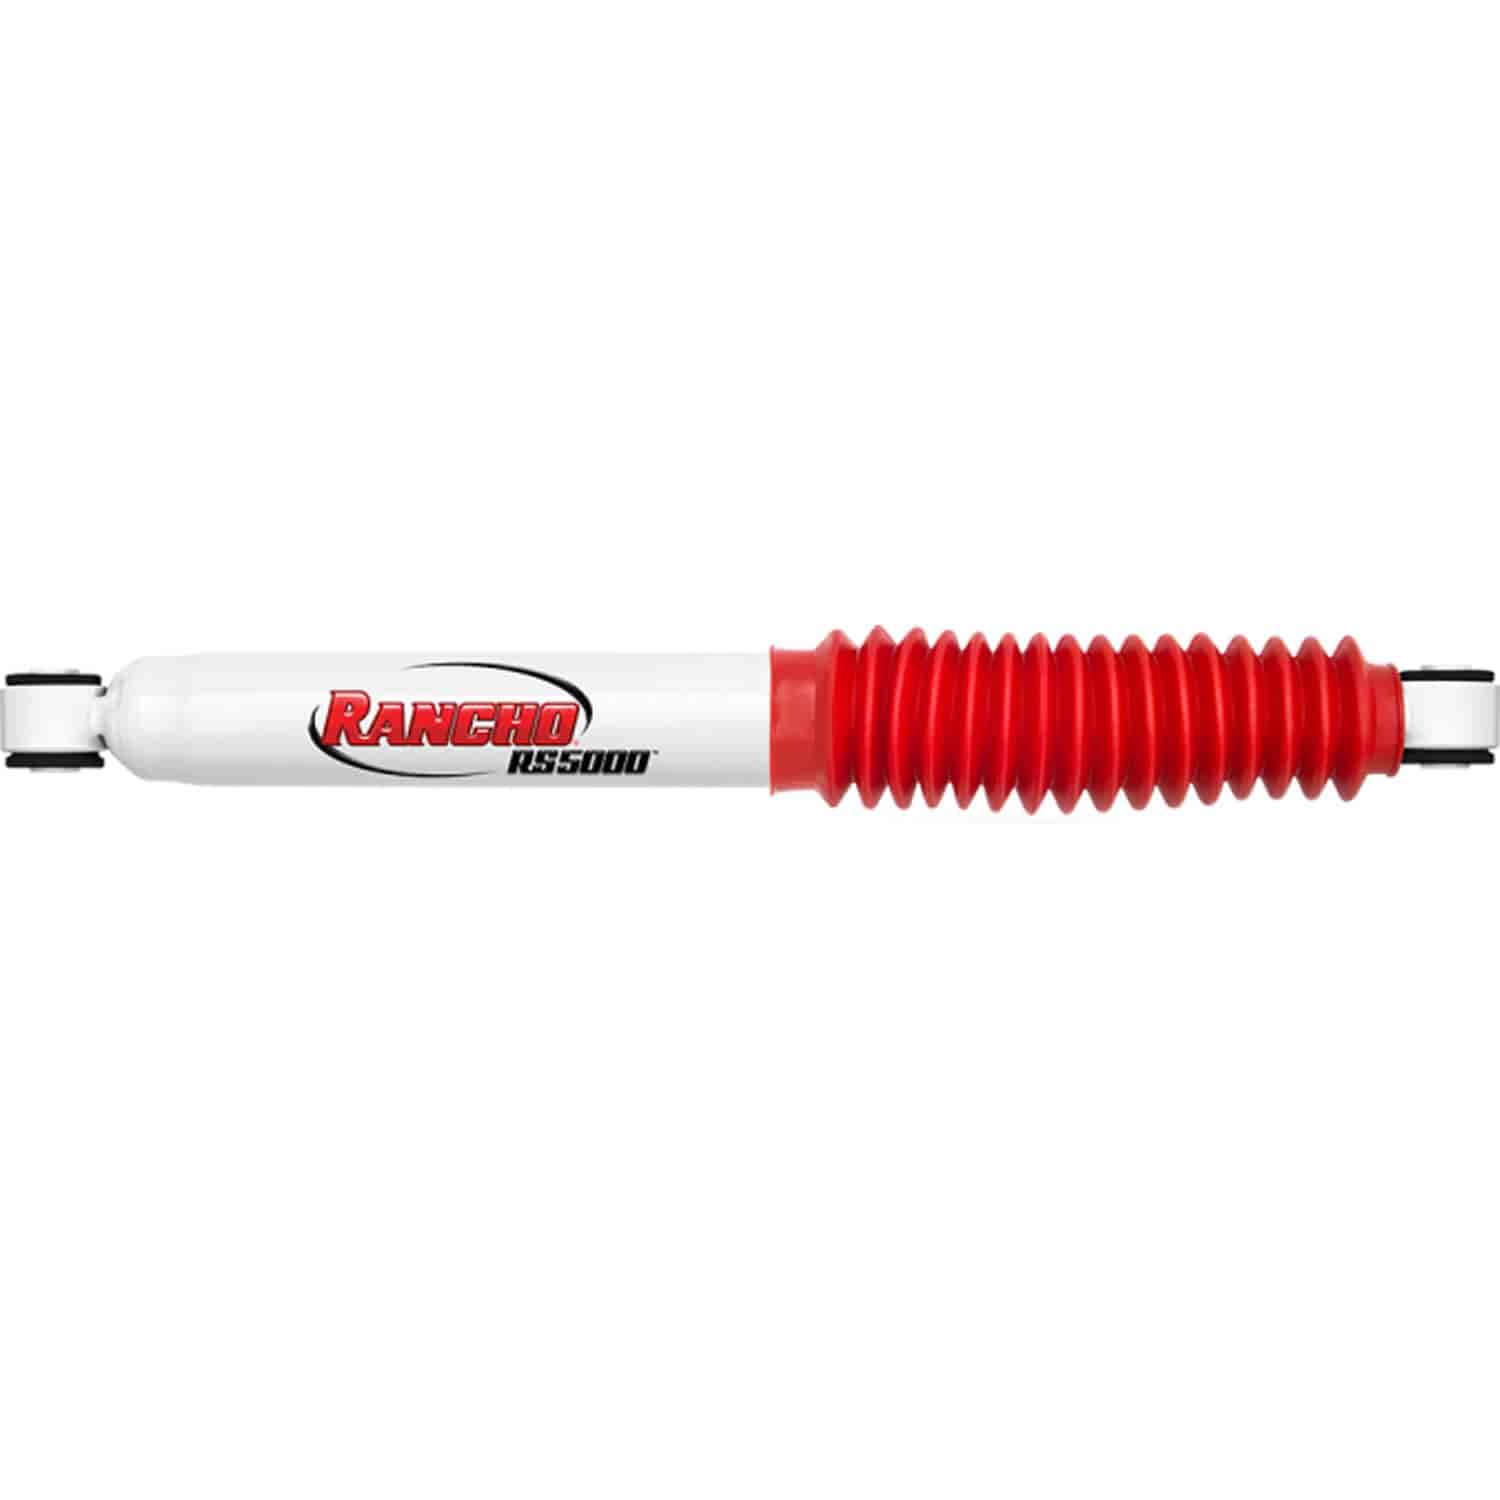 RS5000 Rear Shock Absorber Fits for Nissan Armada